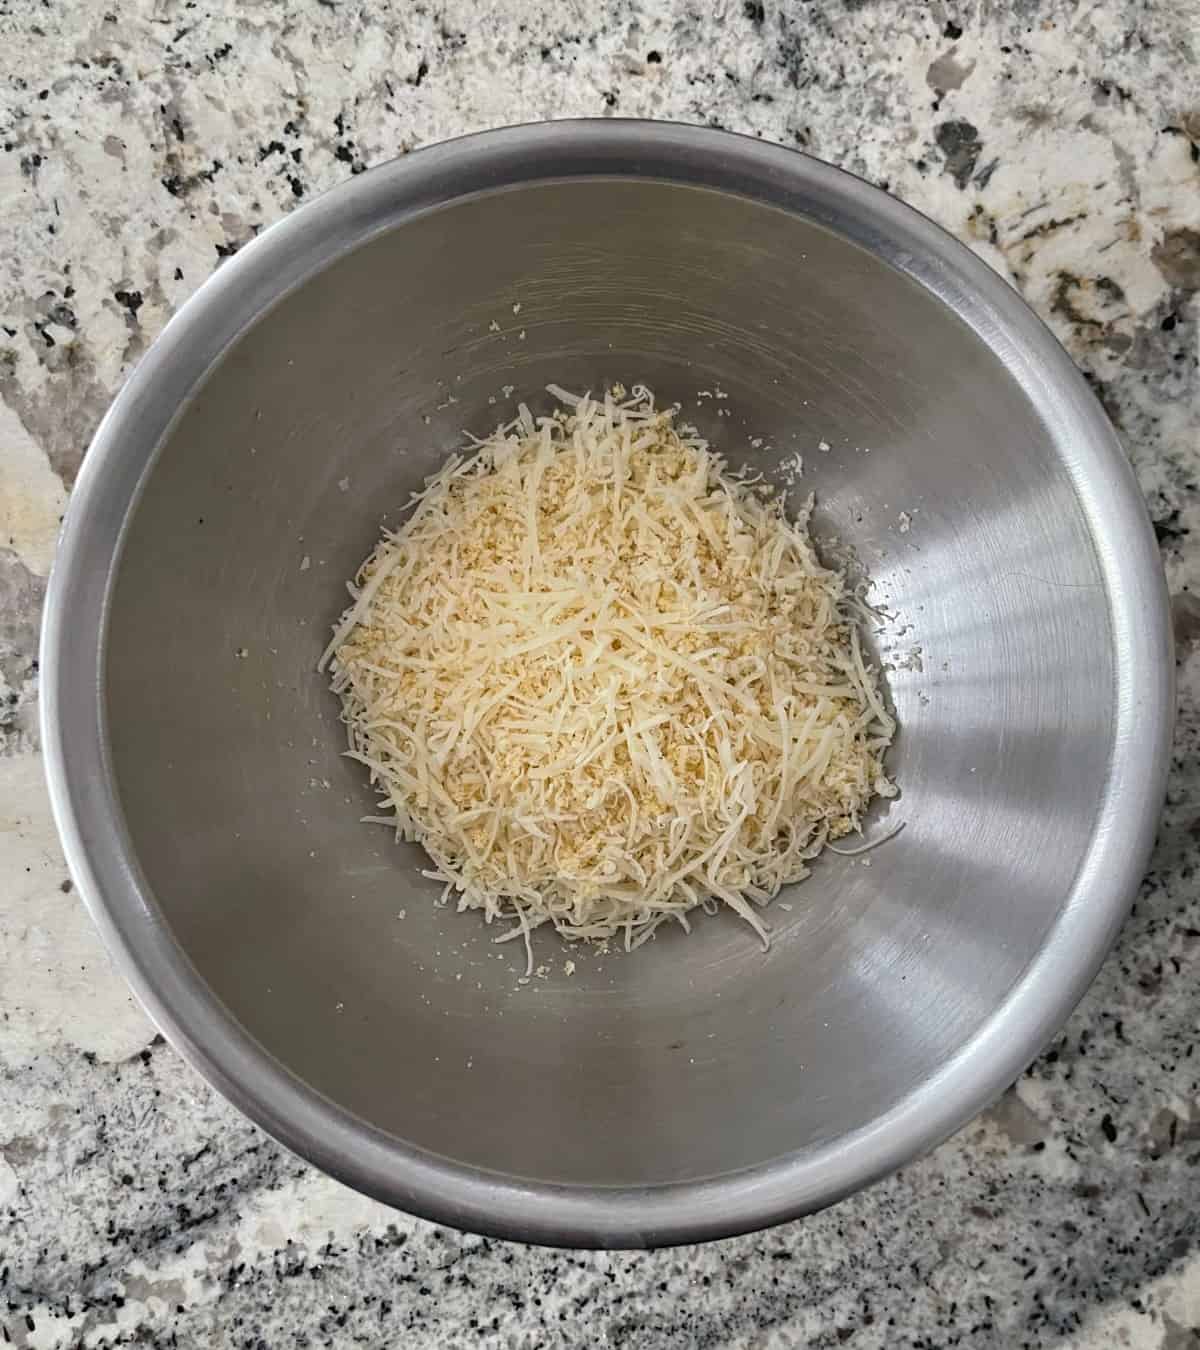 Grated Parmesan cheese mixed with onion powder, garlic powder, salt and pepper in stainless mixing bowl on granite.